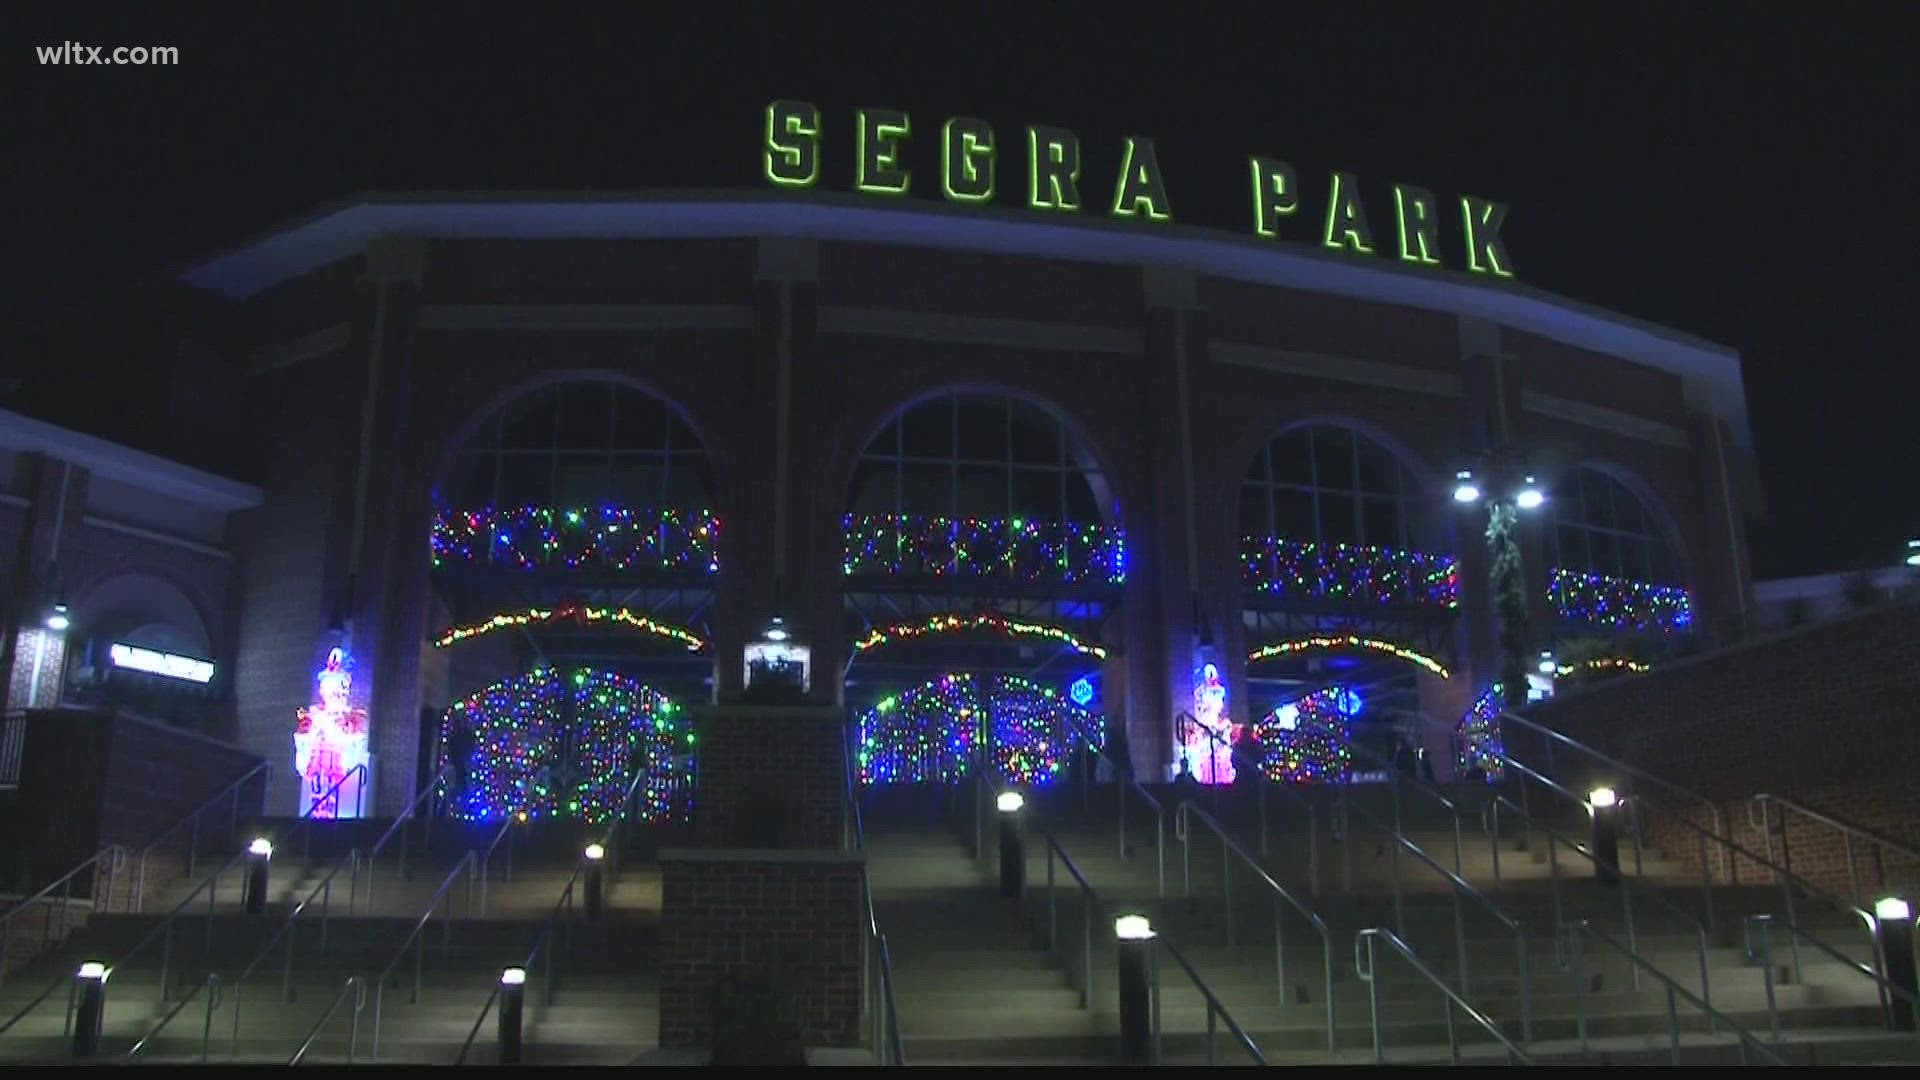 The Columbia Fireflies are starting a new holiday tradition: Fireflies Holiday Lights at Segra Park in Columbia, South Carolina.